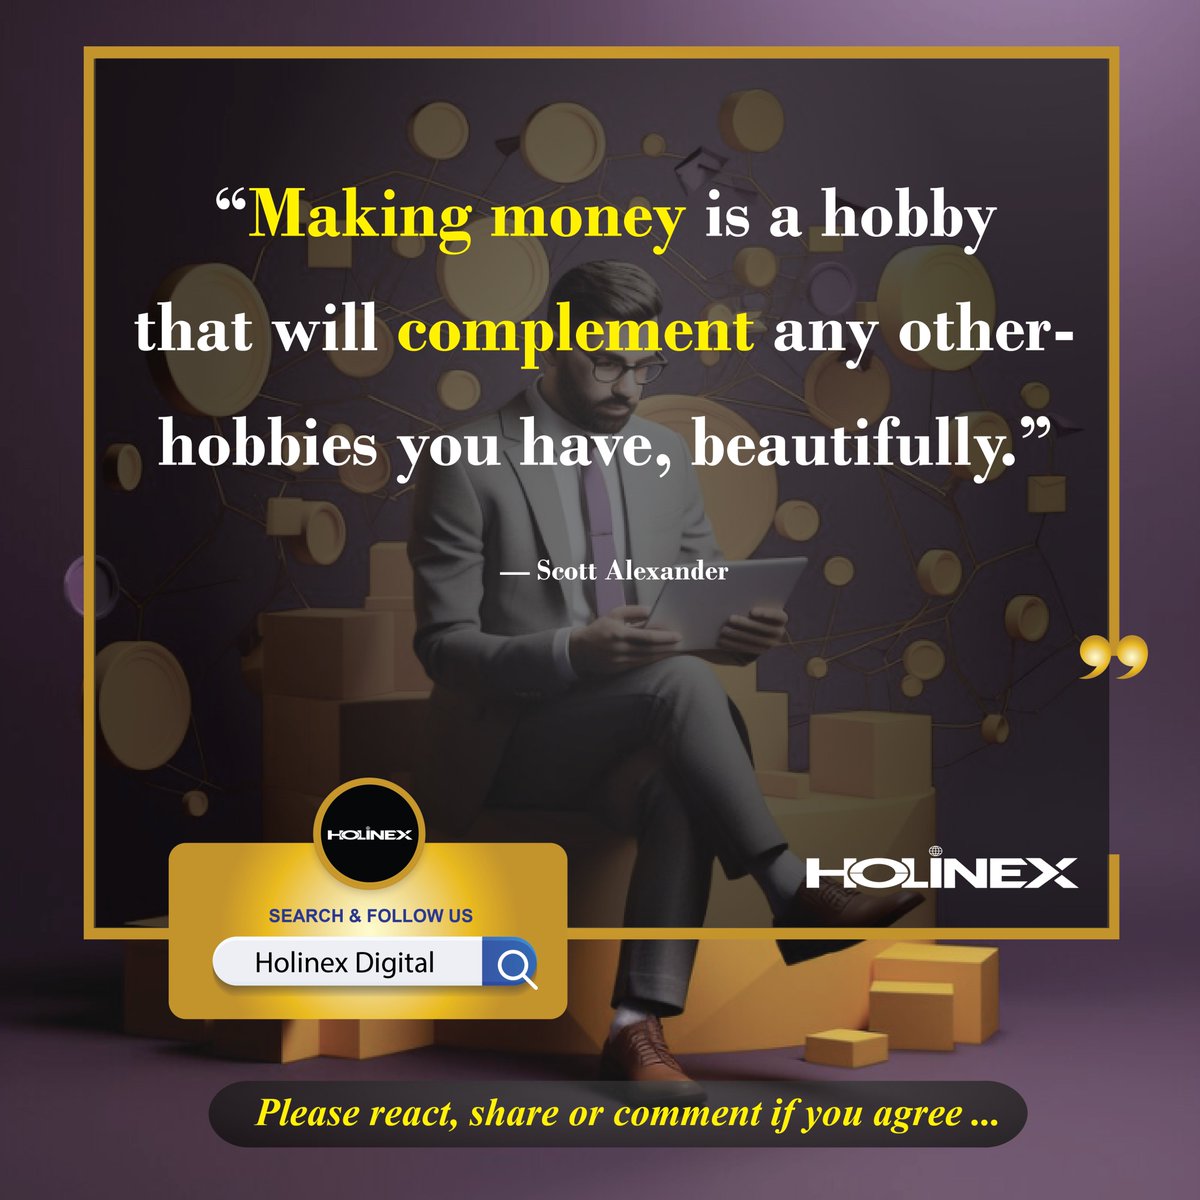 How do you integrate your passion into your financial journey? I'm eager to hear your thoughts and experiences! 💡

Visit our website at holinex.com.

#FinancialSuccess #PassionAndProfits #CareerBalance #ScottAlexanderQuotes #FinancialSuccess #PassionAndProfits